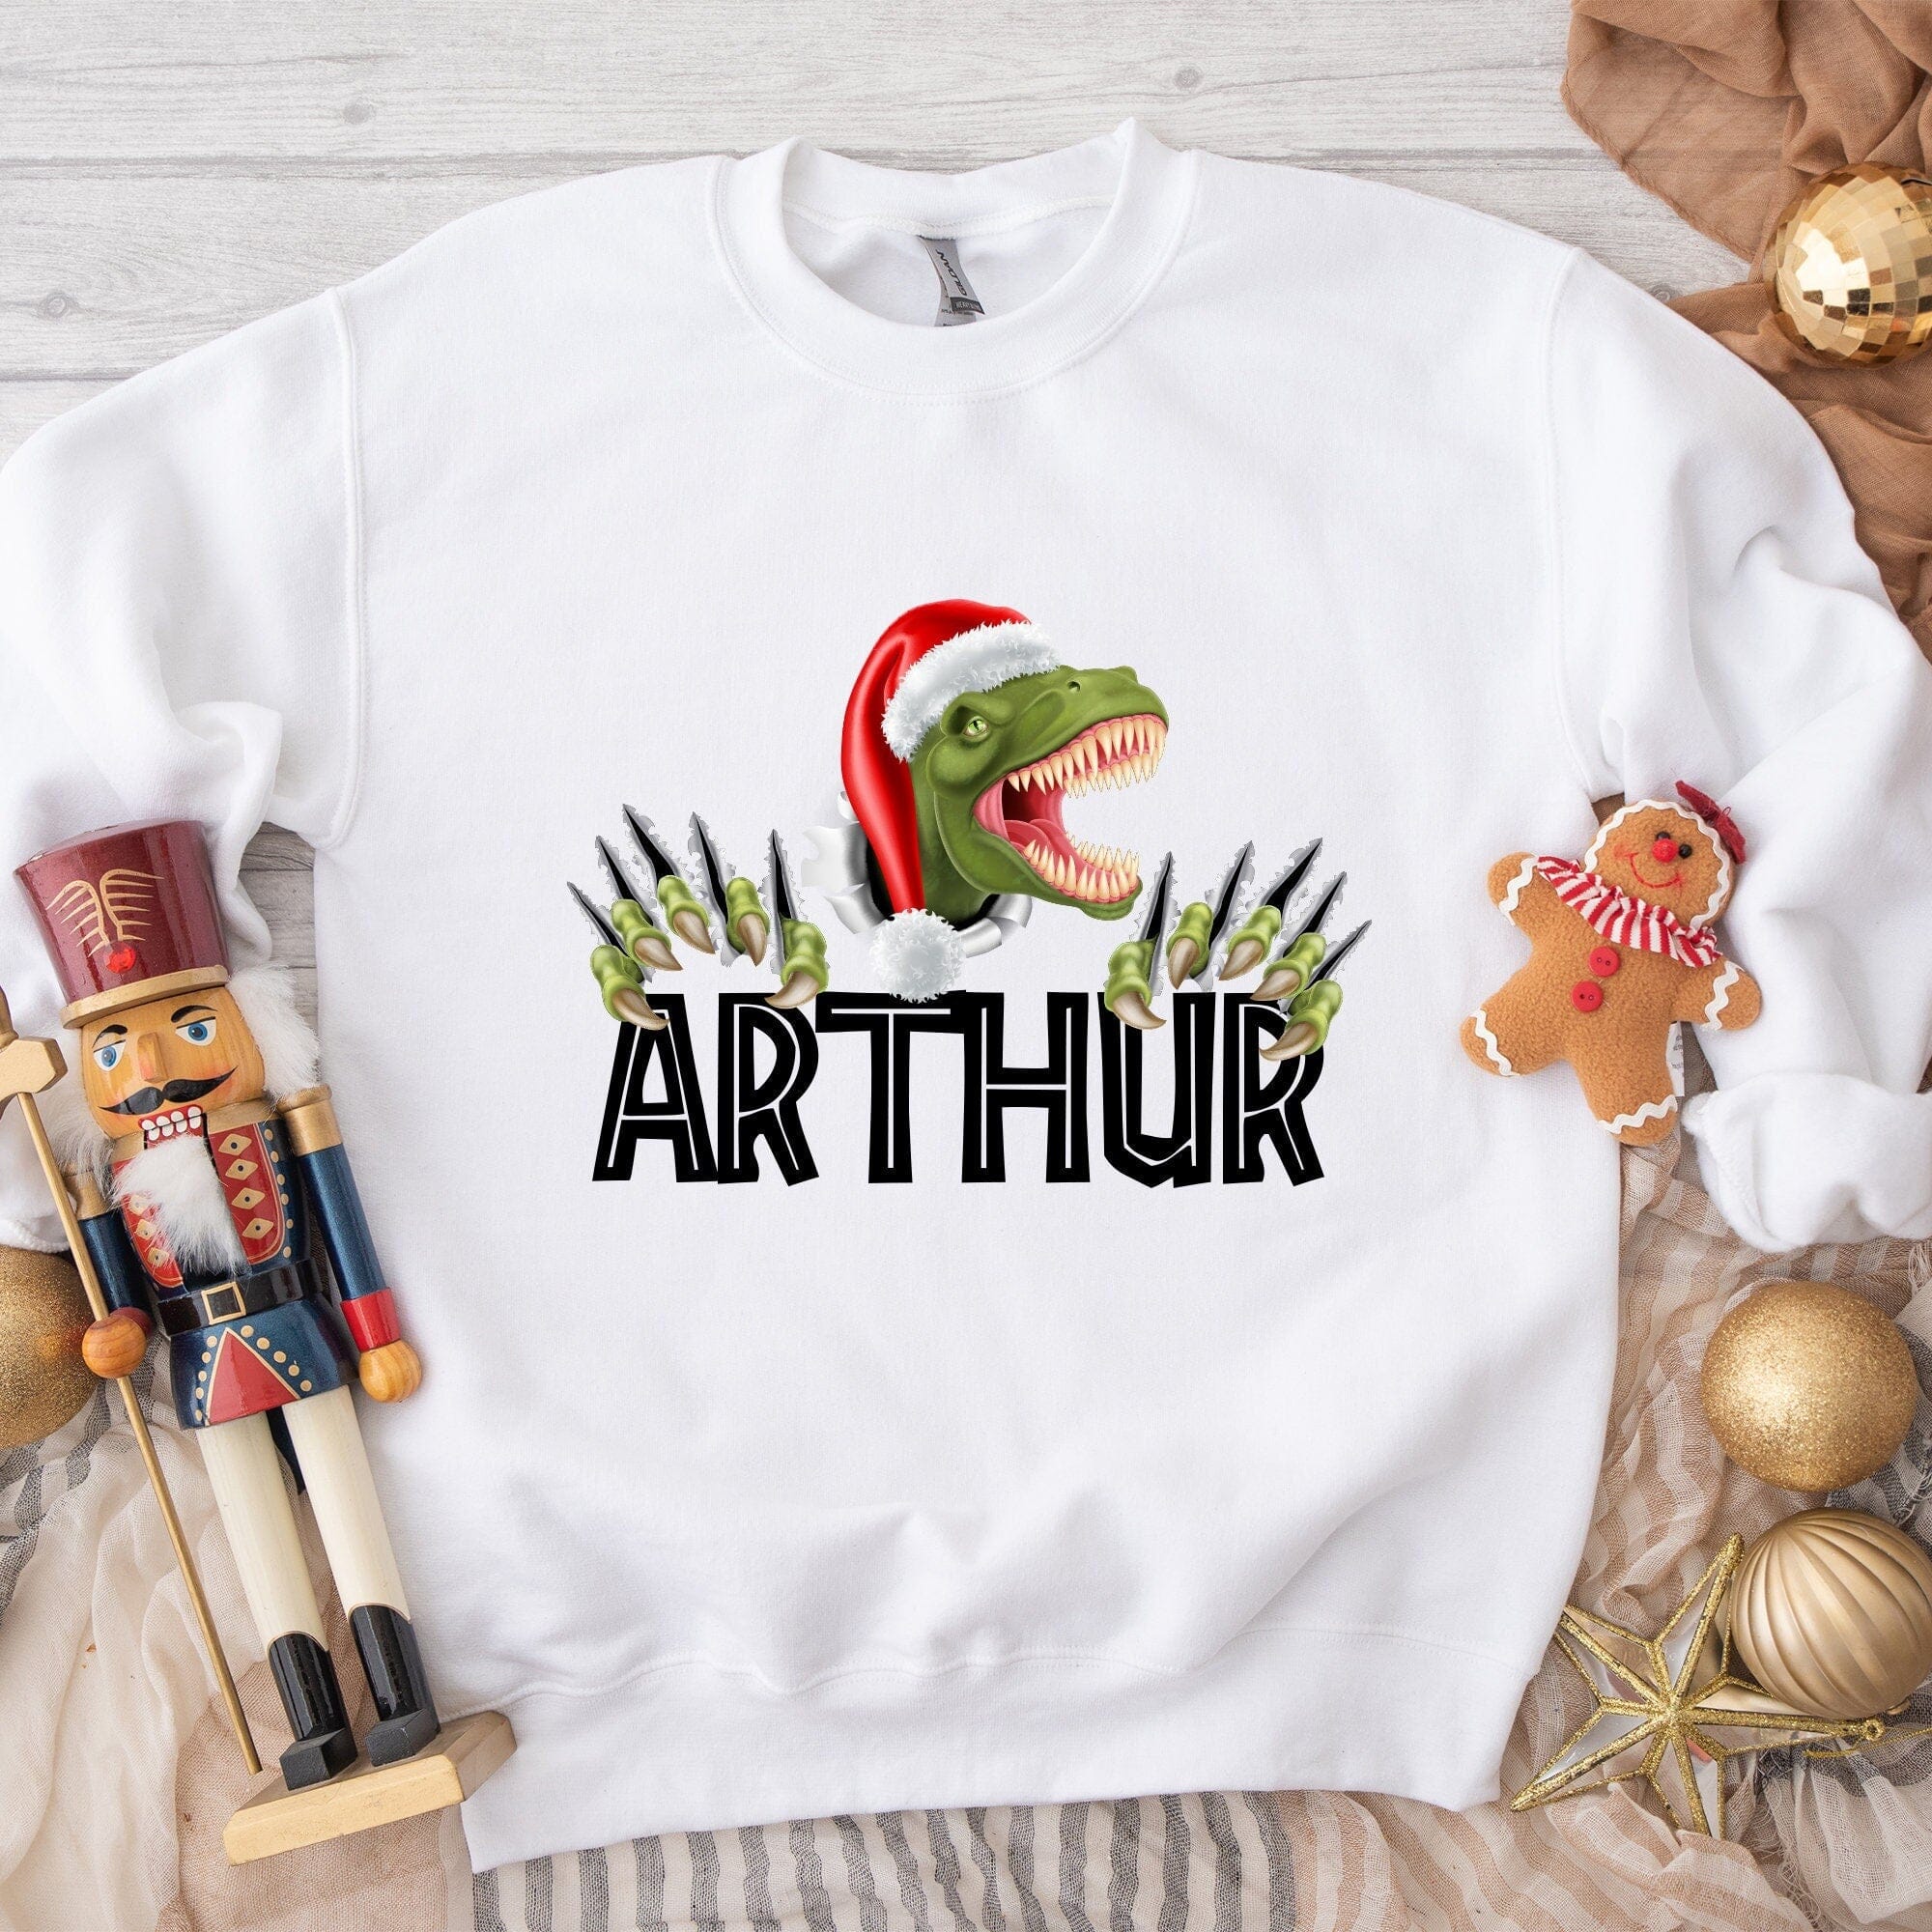 Personalised Dinosaur Christmas Jumper T-Rex With Santa Hat Gift For Kids Him Boy Girl Baby Toddler Outfit Jumper Day